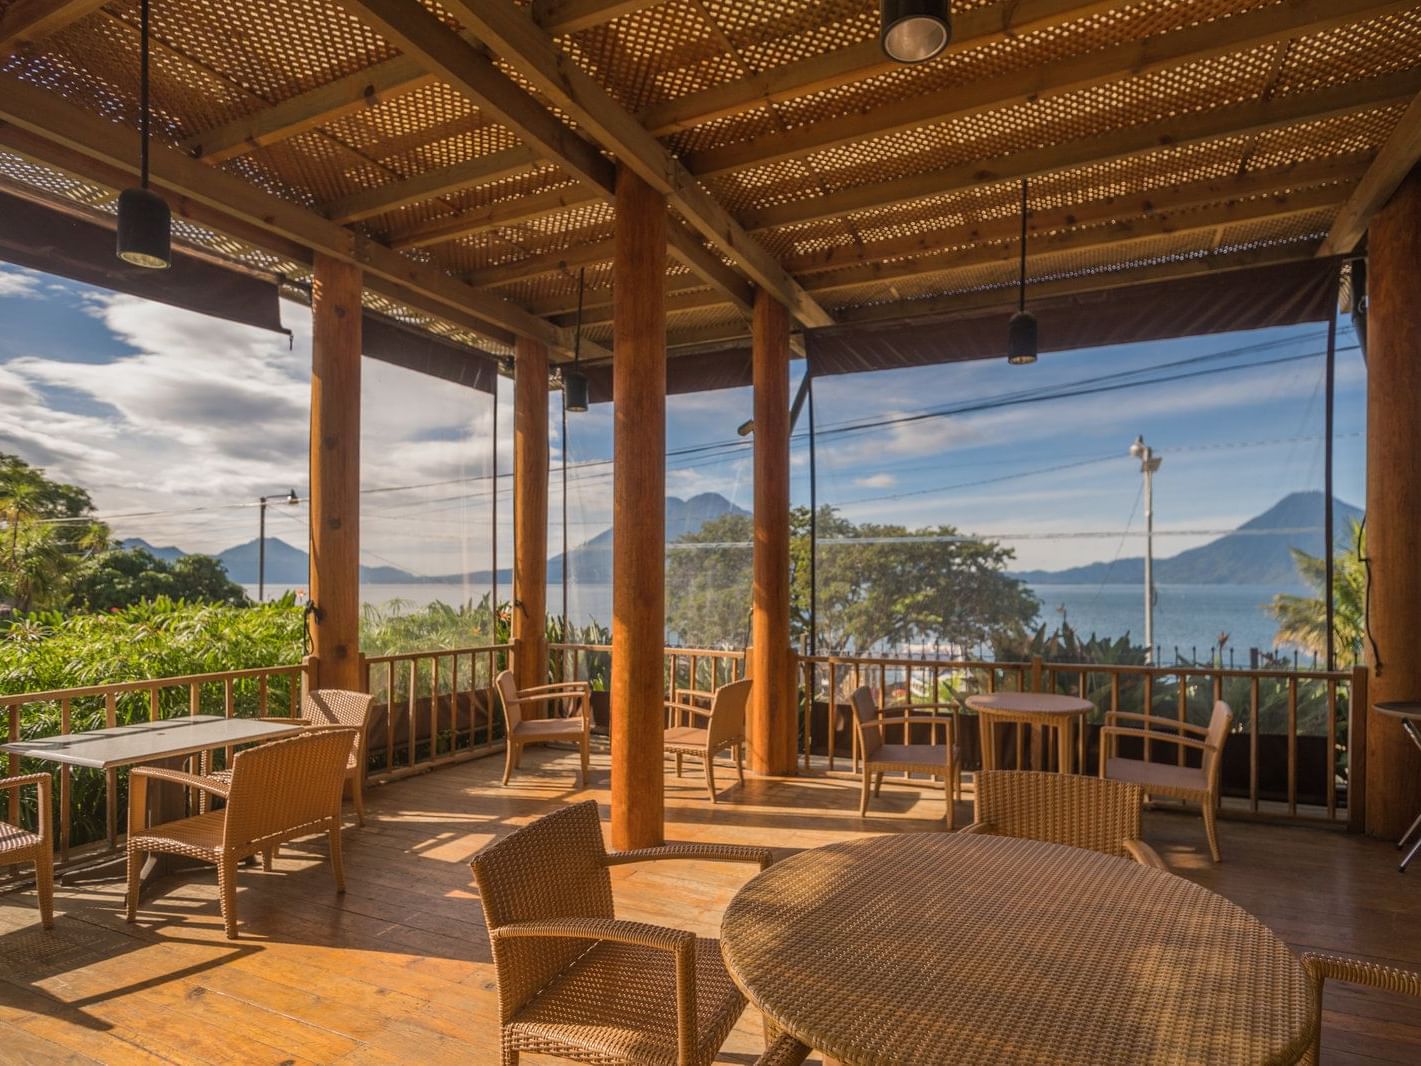 Porch lounge area with wooden interior overlooking the mountains in Deck at Porta Hotel del Lago